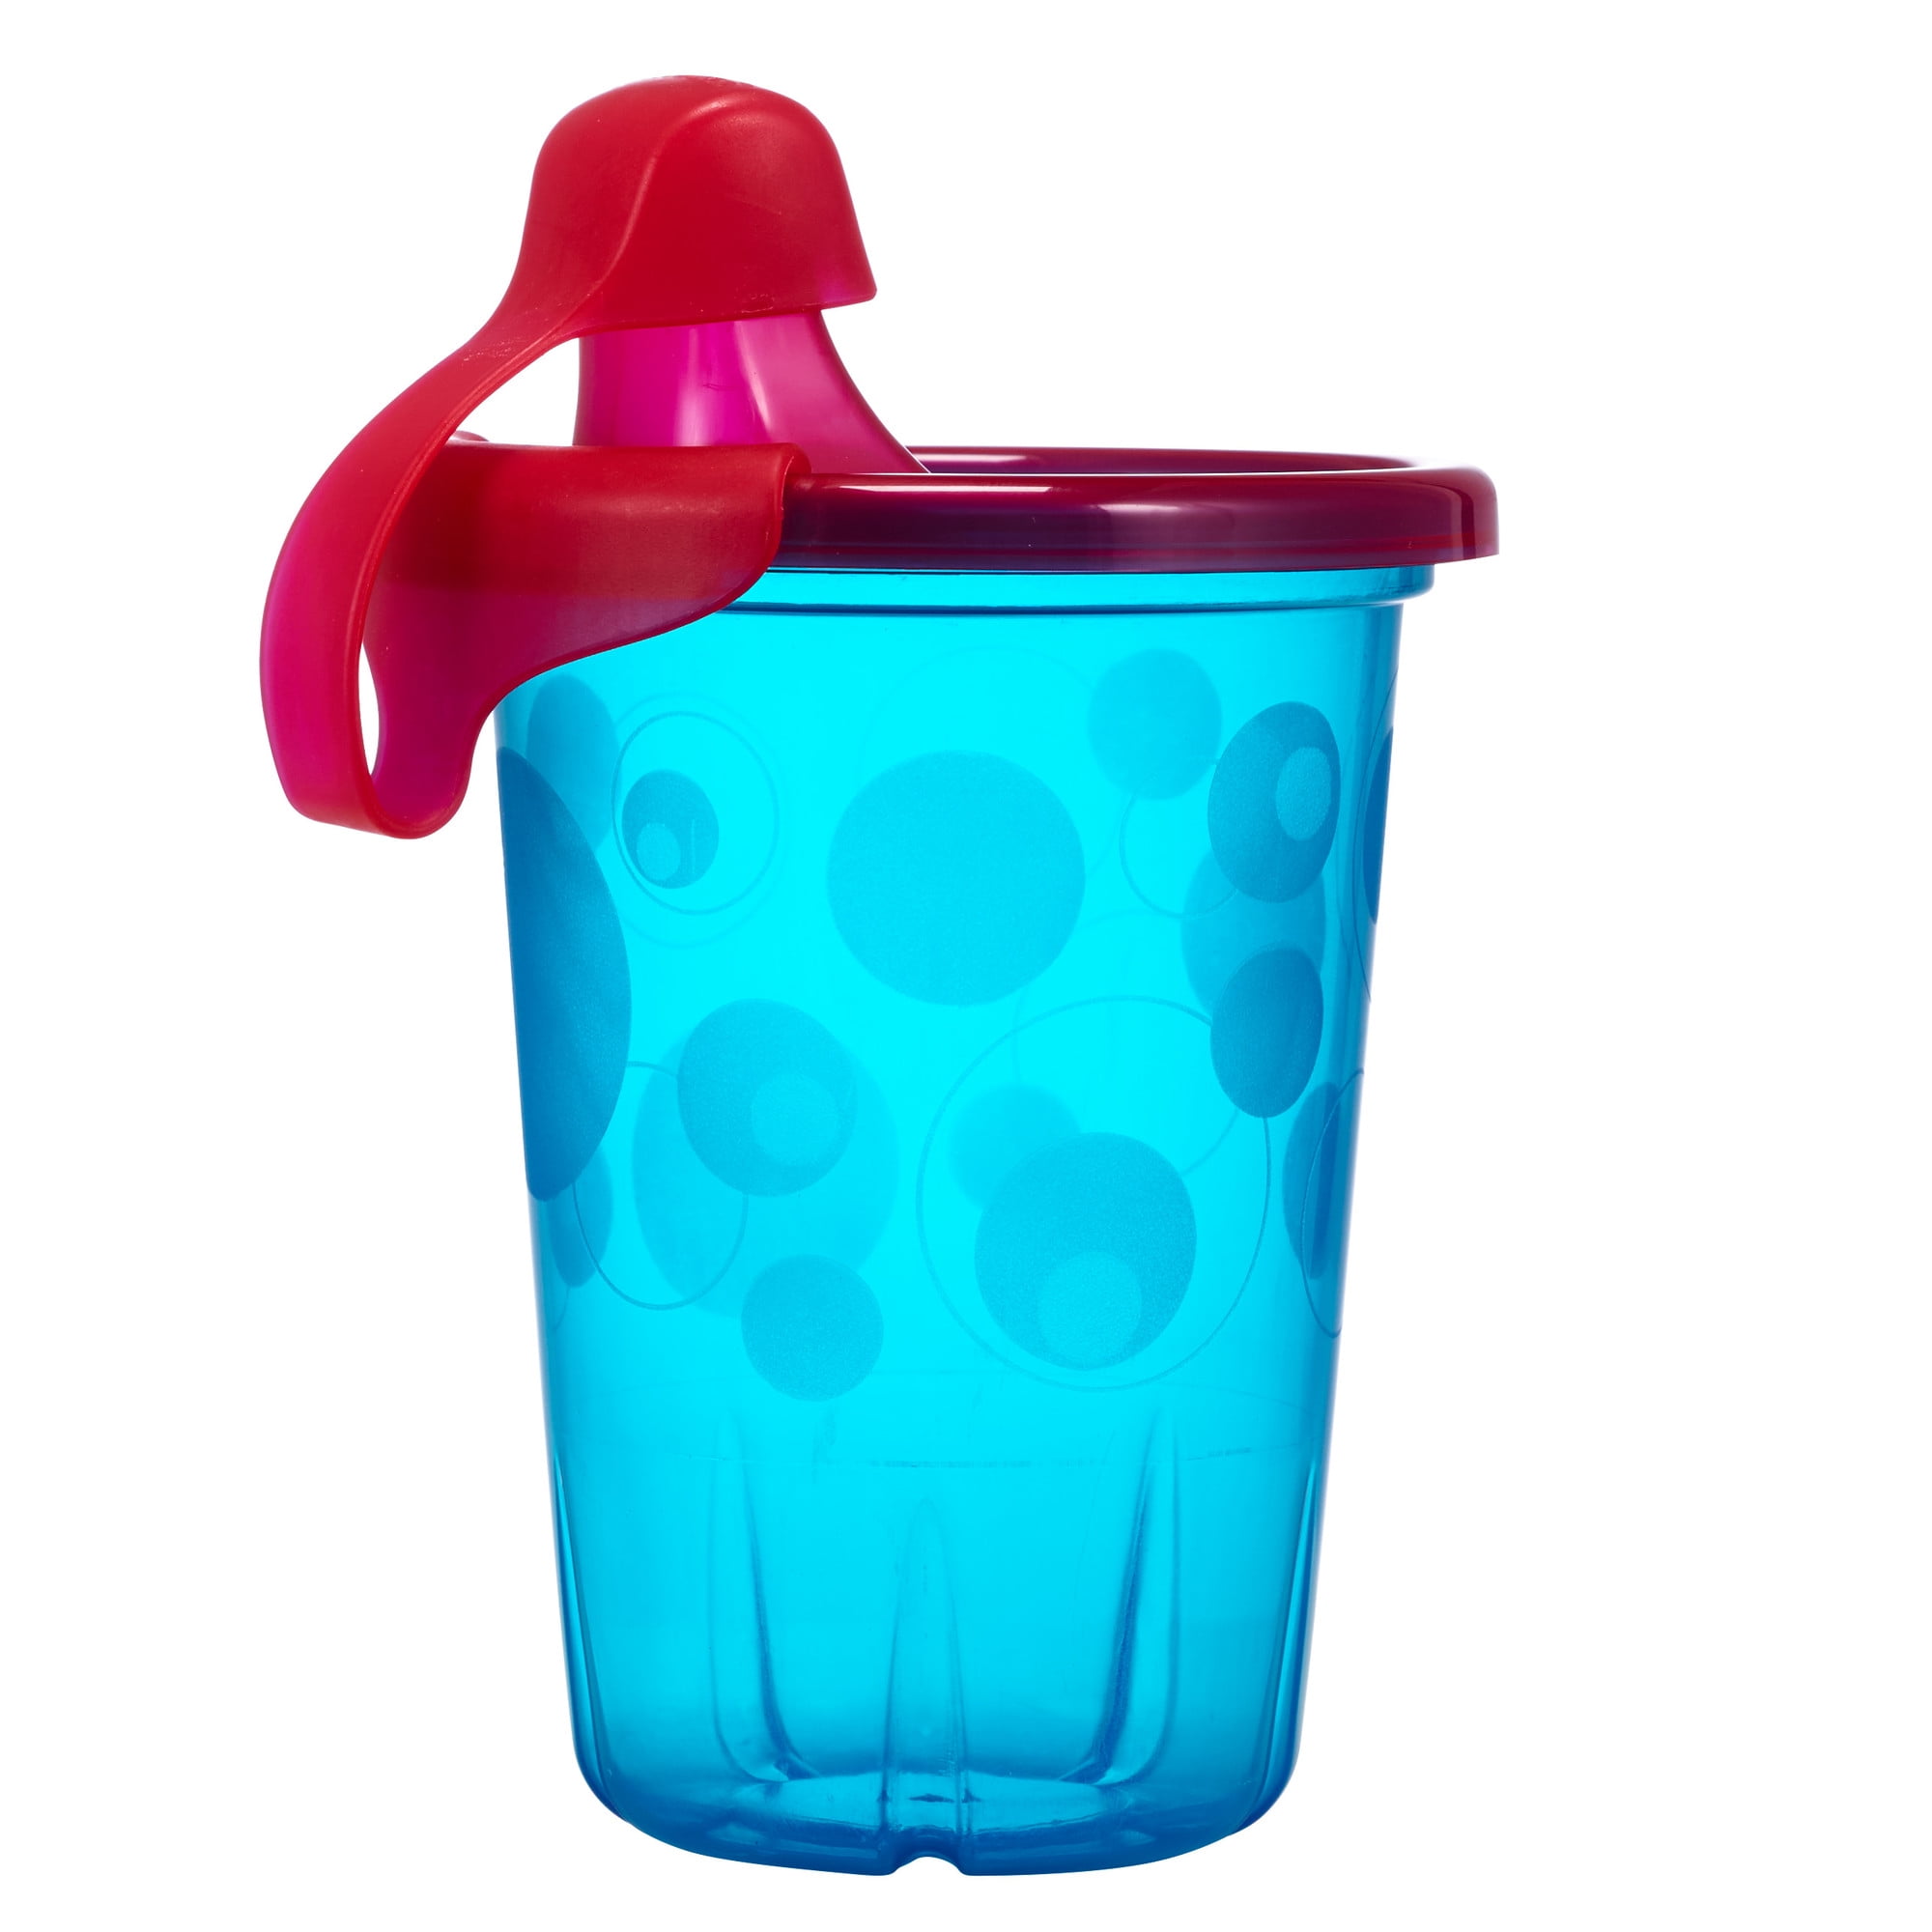 The First Years Take & Toss Spill Proof Sippy Cups - Rainbow Party Pack -  Reusable Toddler Cups - Kids Cups and Snap On Lids for Ages 9 Months and Up